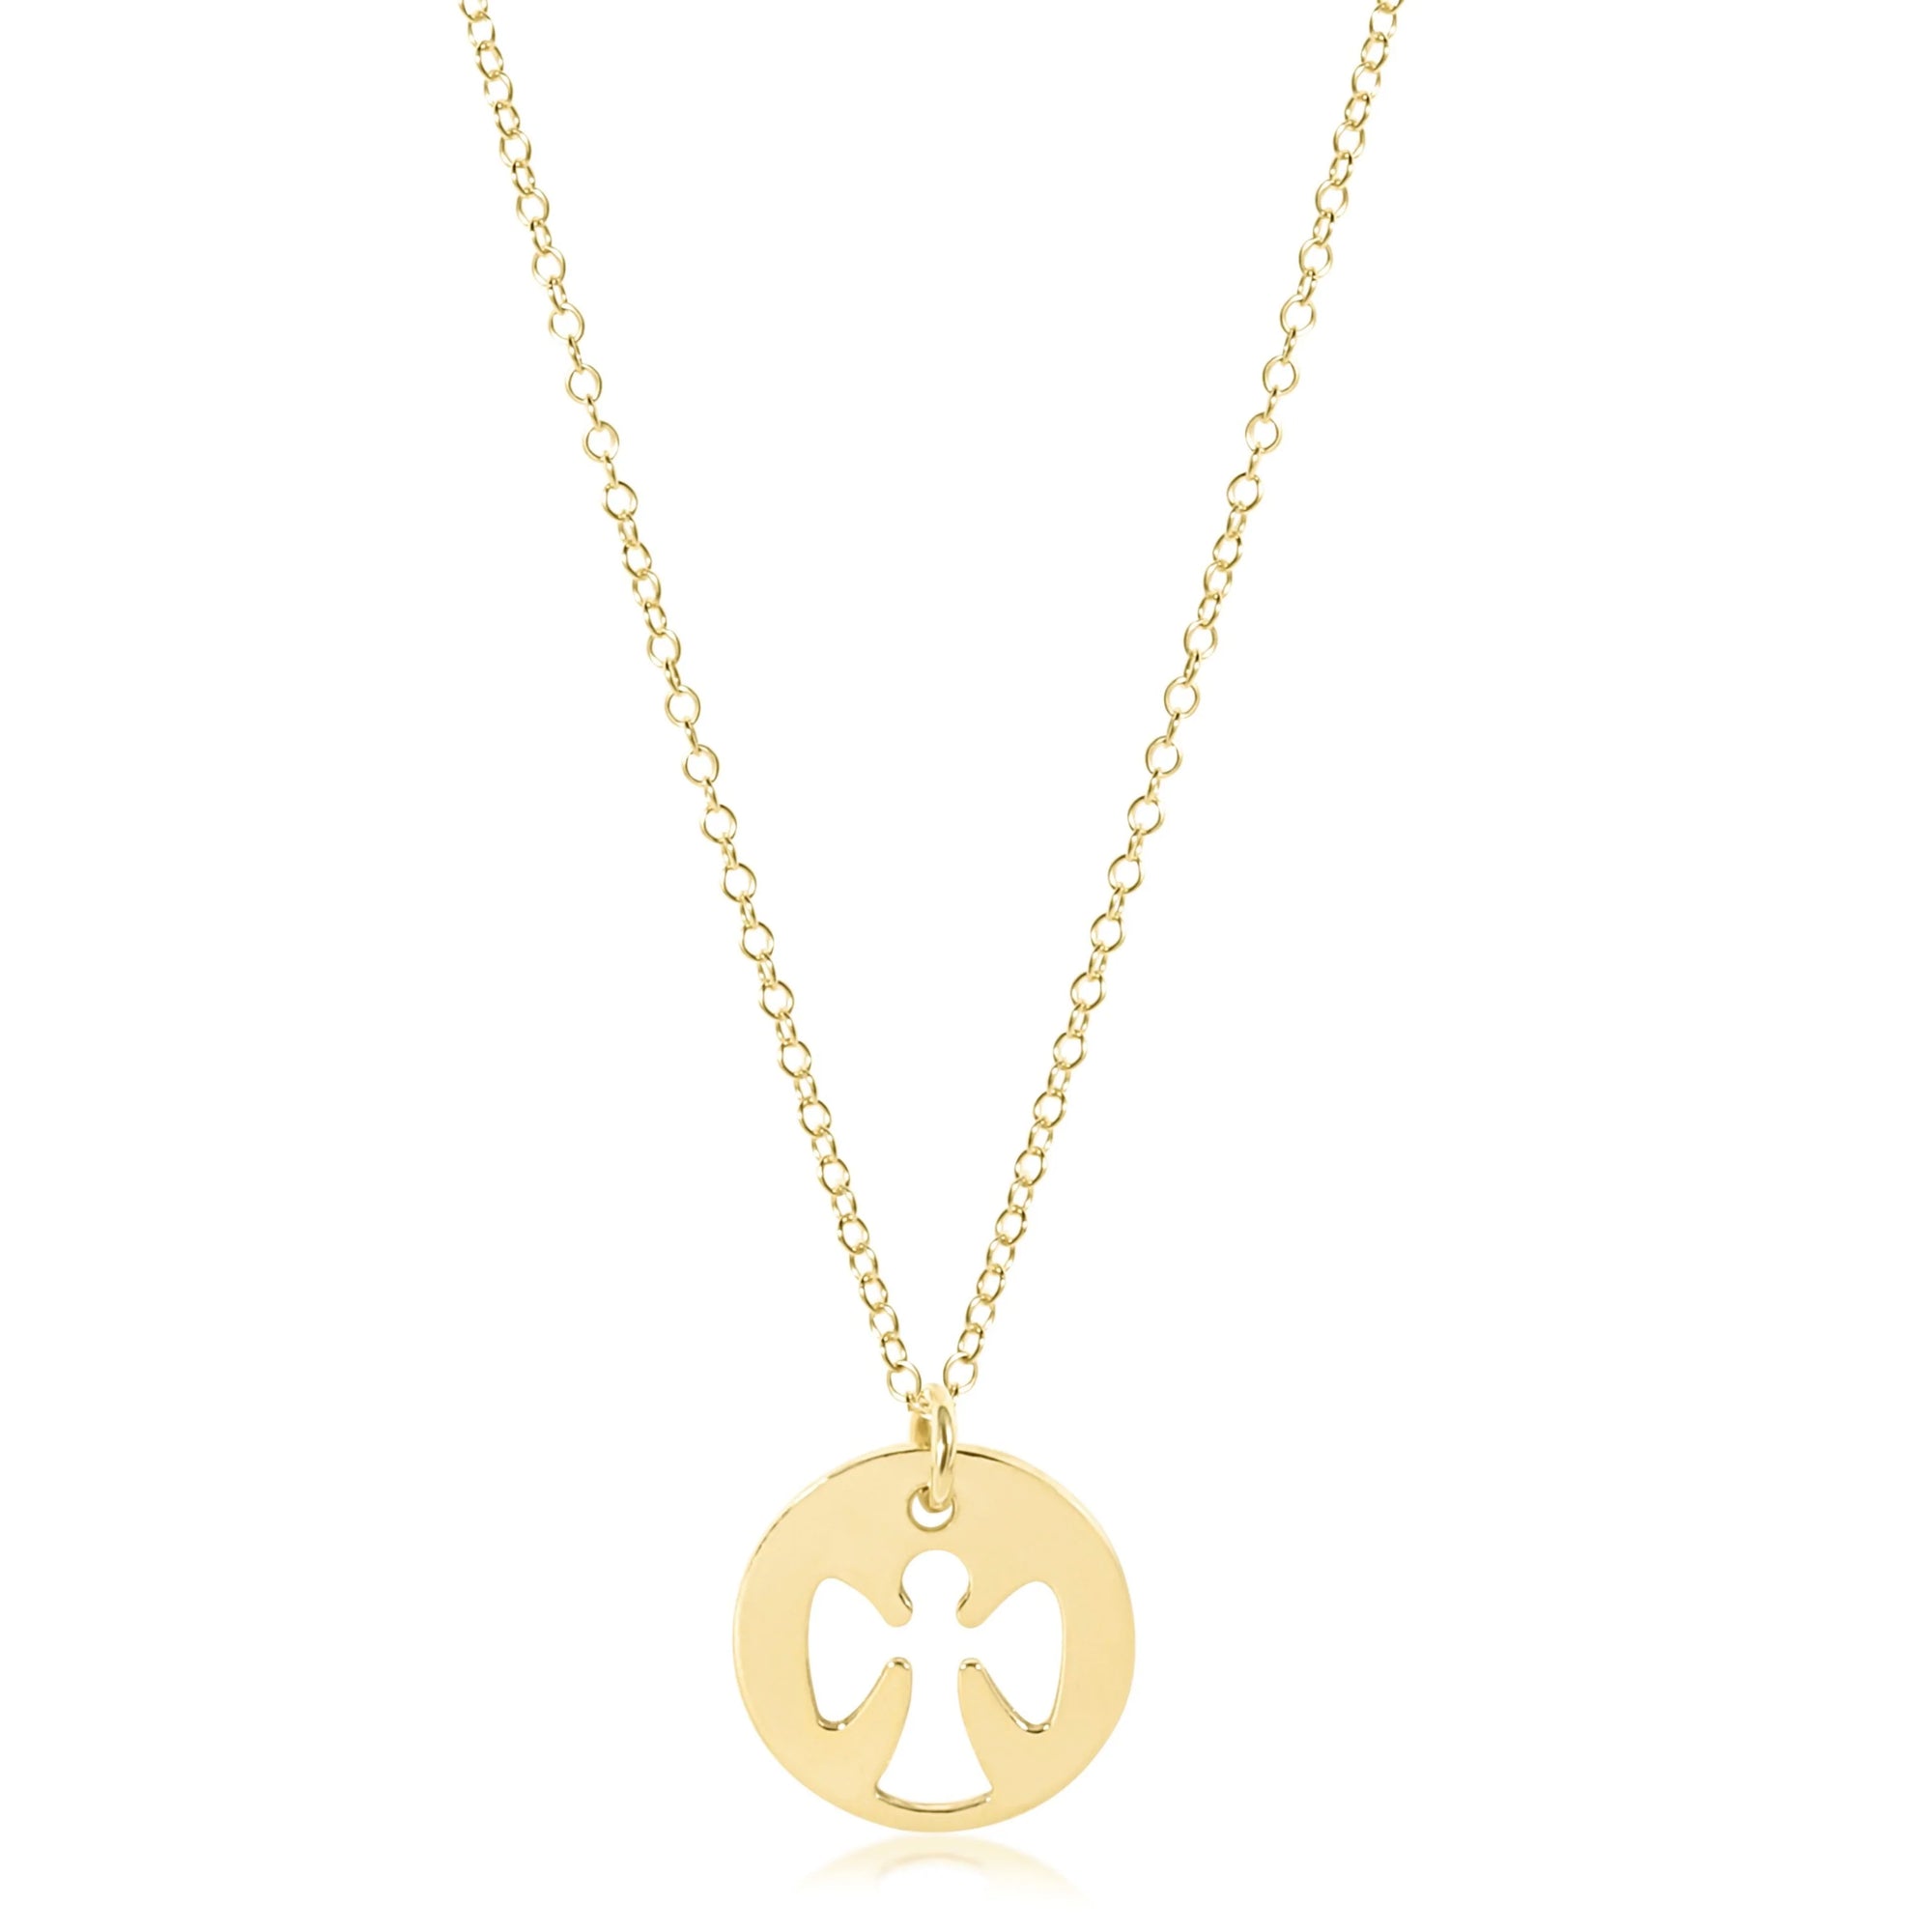 16" Gold Necklace - Guardian Angel